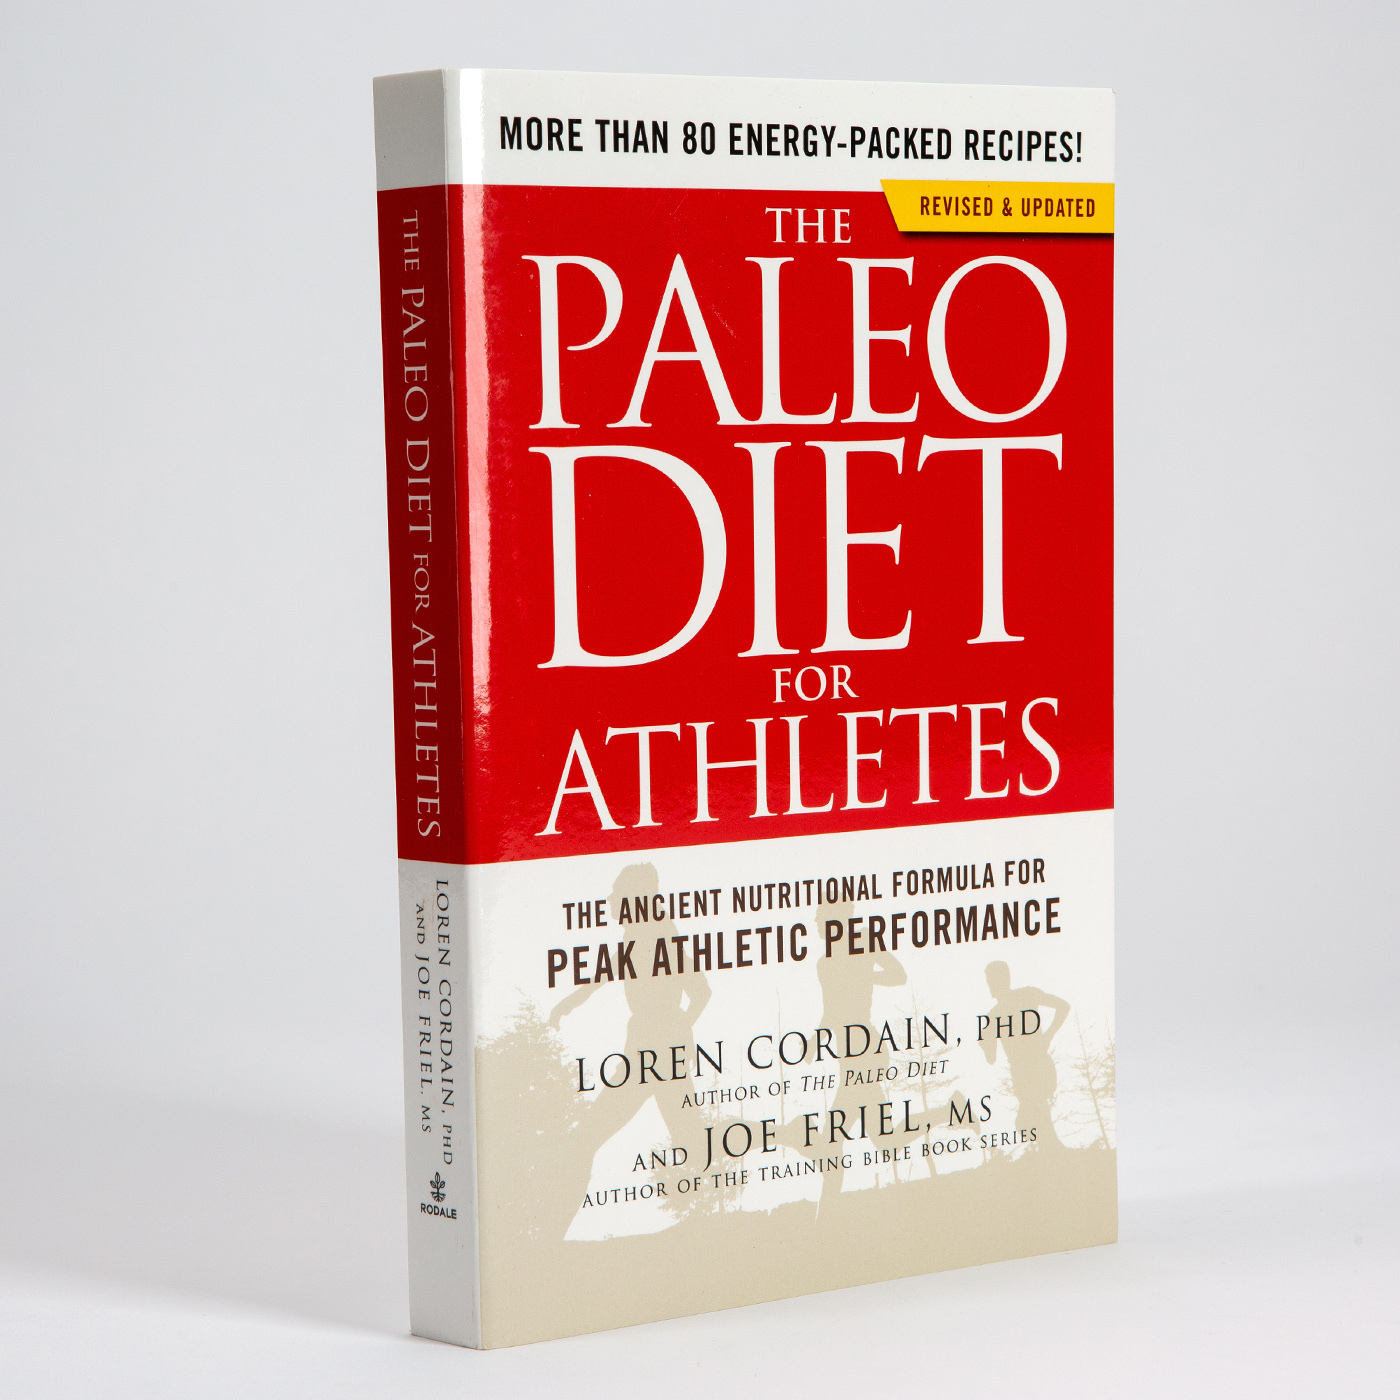 Photo of The Paleo Diet for Athletes book